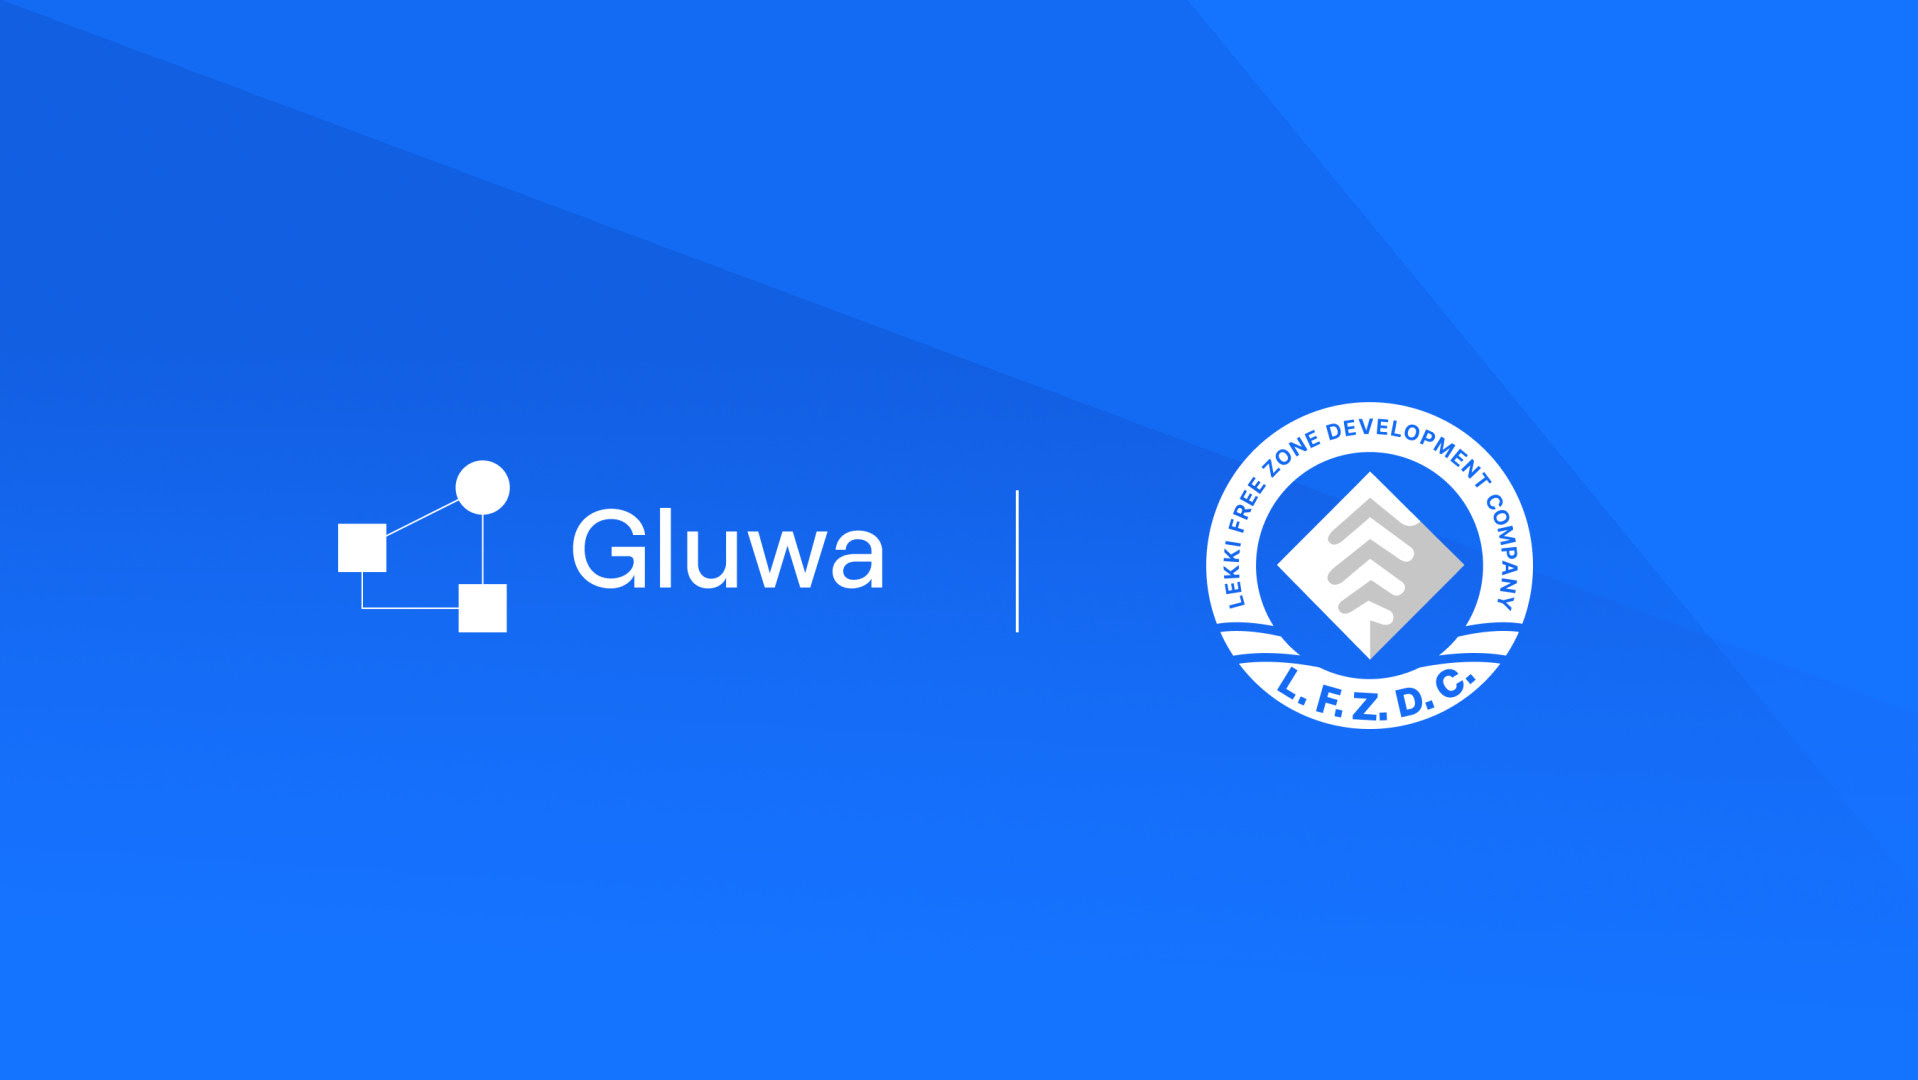 The Lekki Free Zone is Set to Collaborate with Gluwa on Blockchain Technology